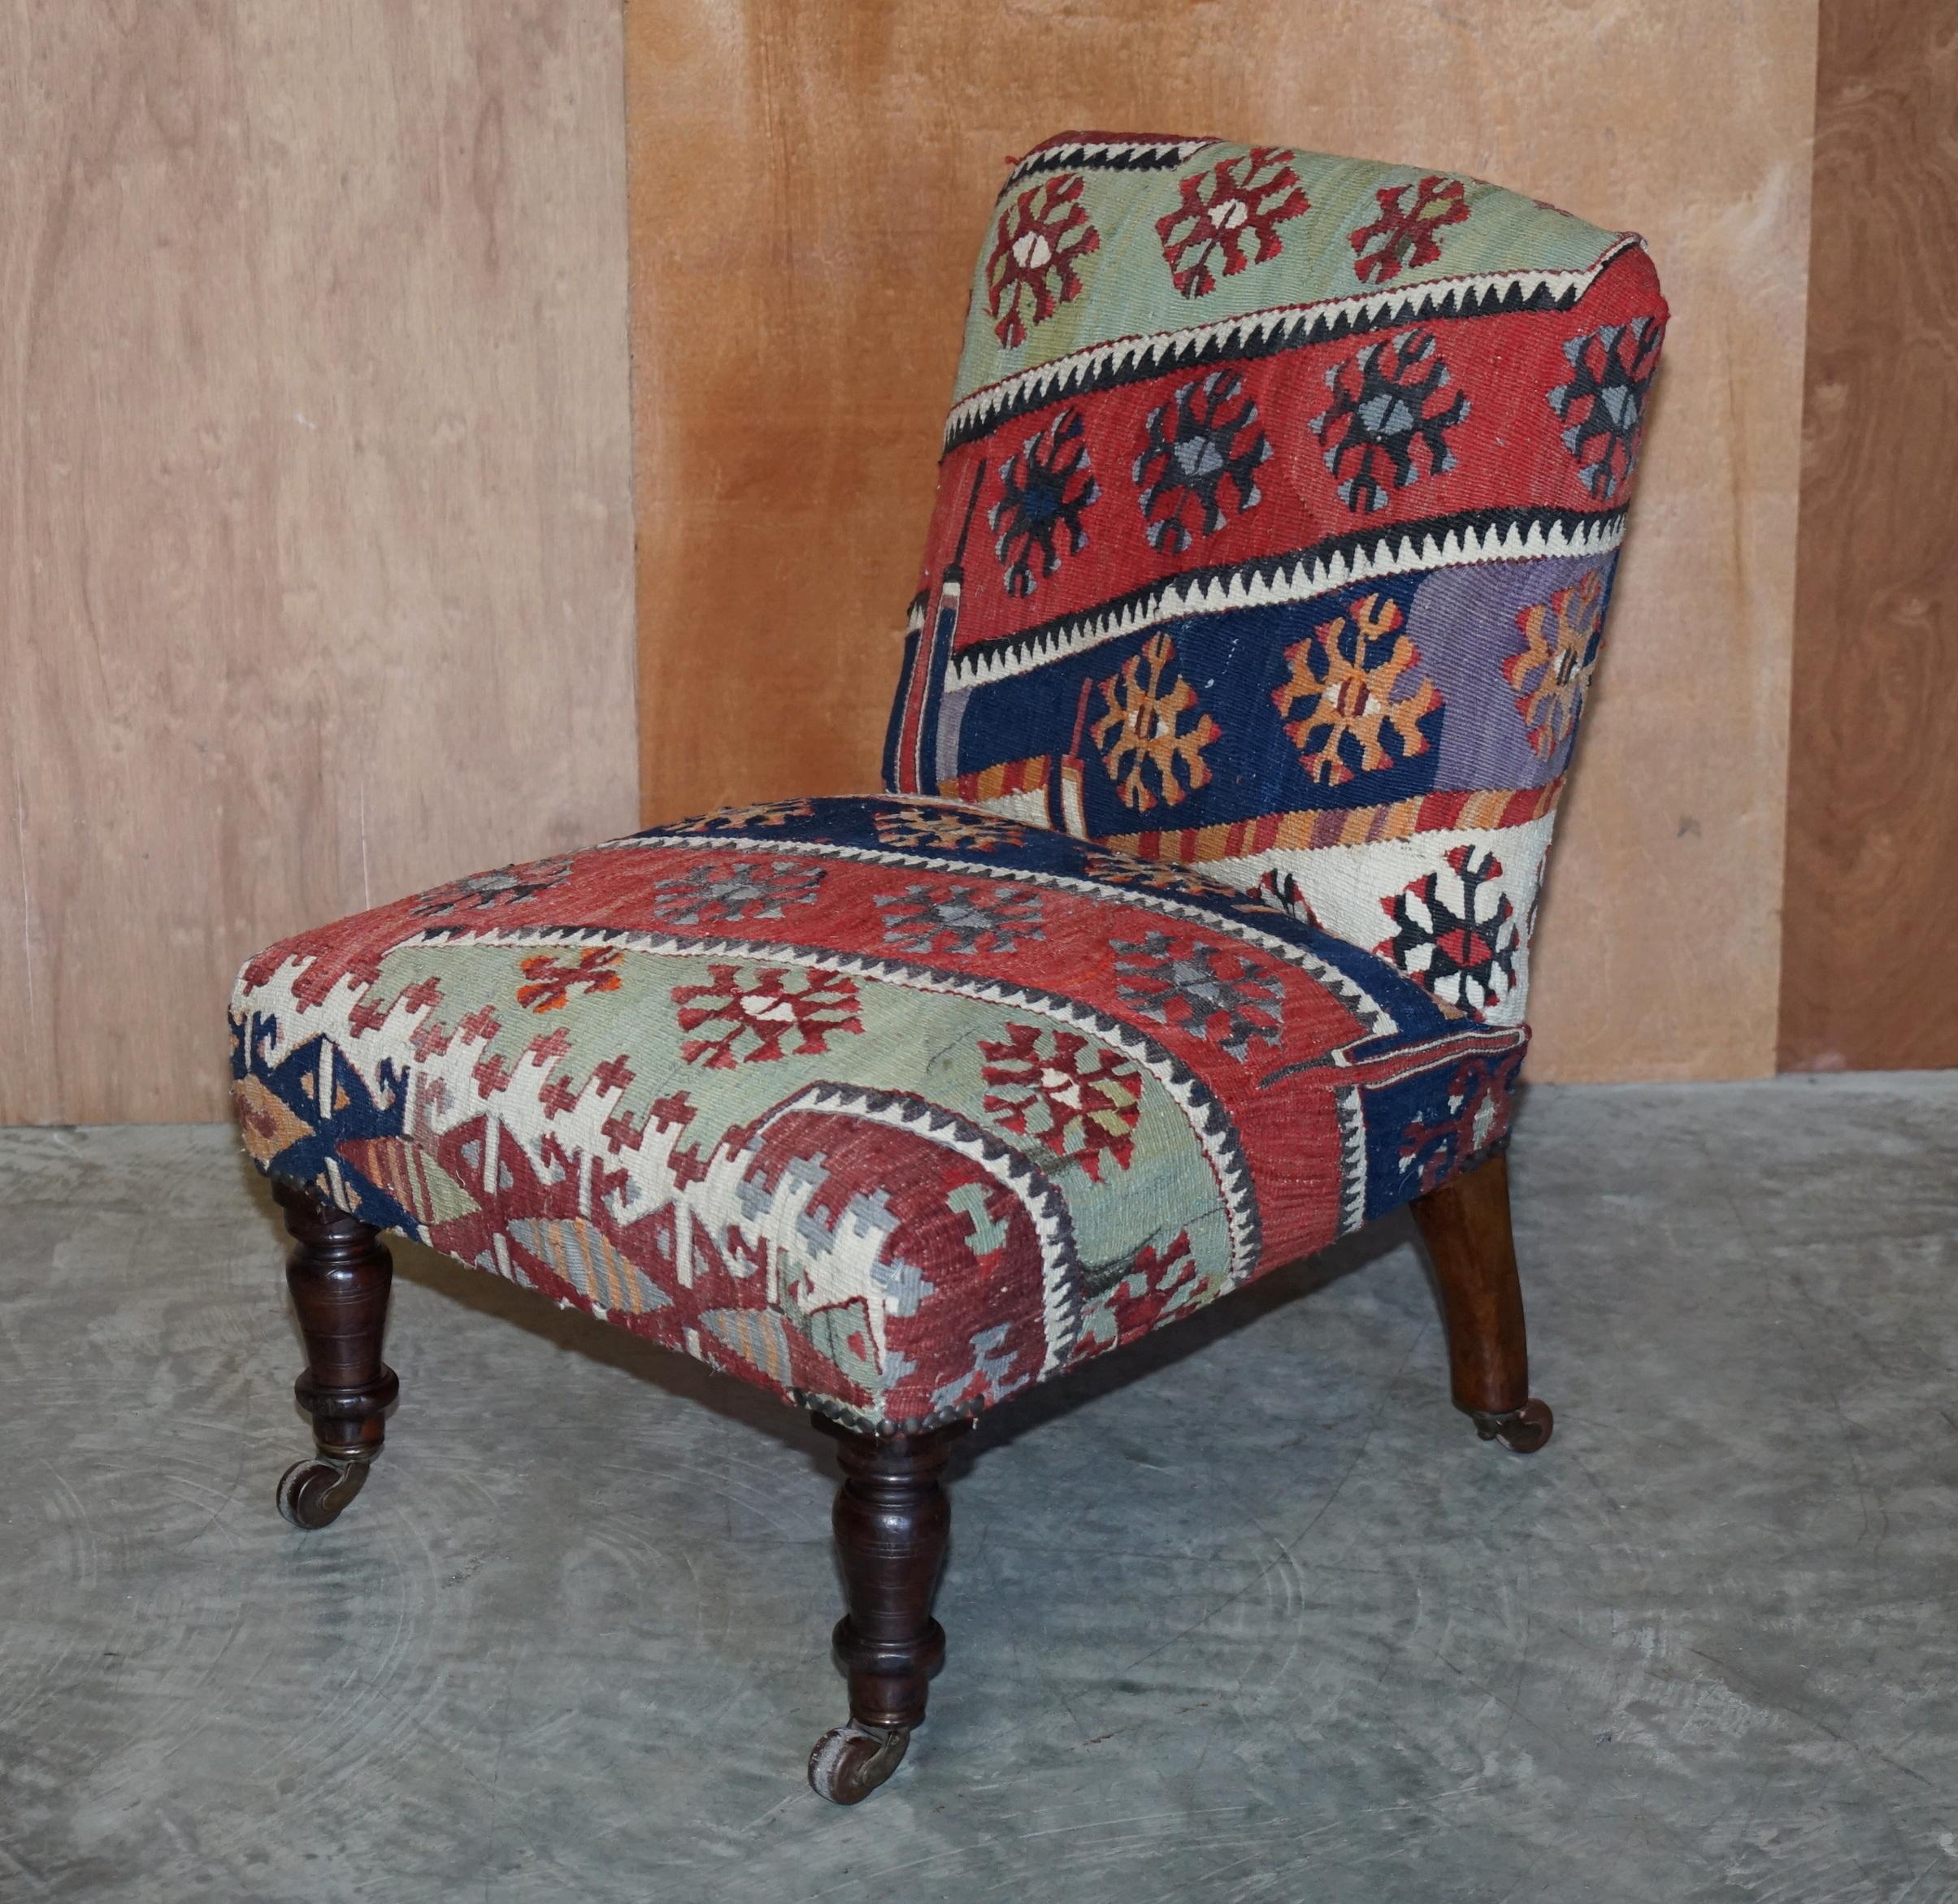 We are delighted to offer for sale this very rare original Victorian Kilim upholstered library reading or nursing side chair

A good looking and well made piece, Victorian Kilim seating is some of the most iconic and collectable in the world, they